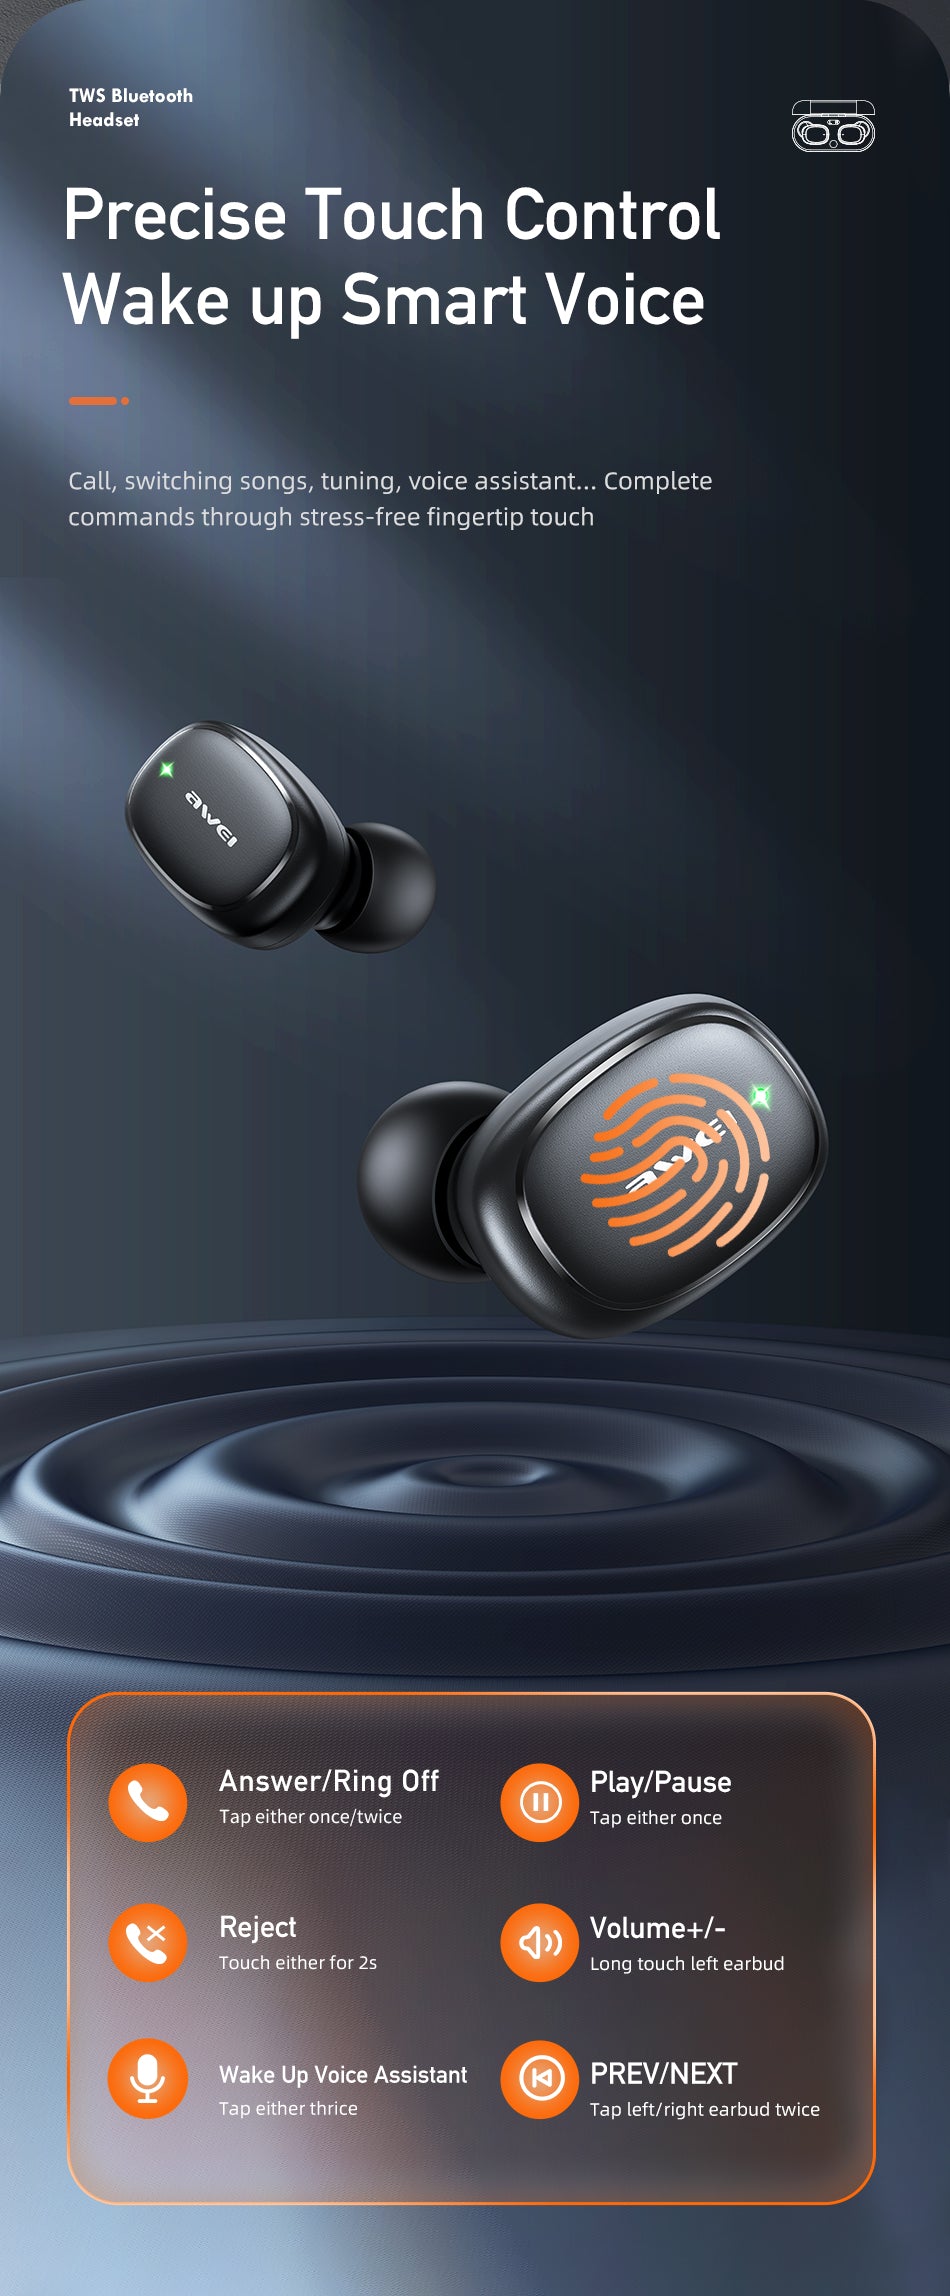 Awei T13 Pro Waterproof Wireless Earbuds with 30 Hours Playtime - BRAND PROMOTION OFFER!